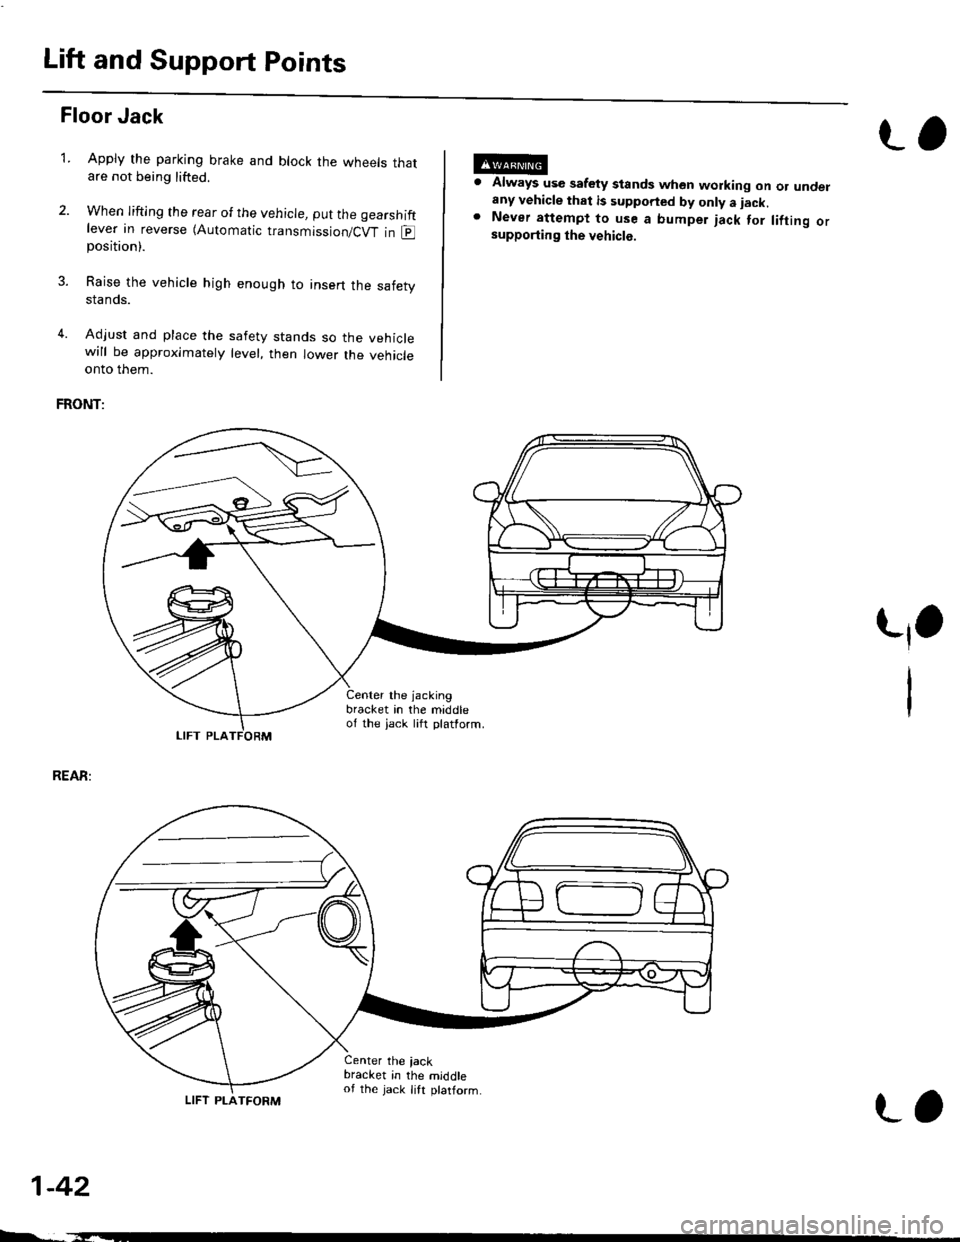 HONDA CIVIC 2000 6.G Workshop Manual Lift and Support Points
Floor Jack
Apply the parking brake and block the wheets thatare not being lifted.
When lifting the rear of the vehicle, put the gearshiftlever in reverse (Automatic transmissio